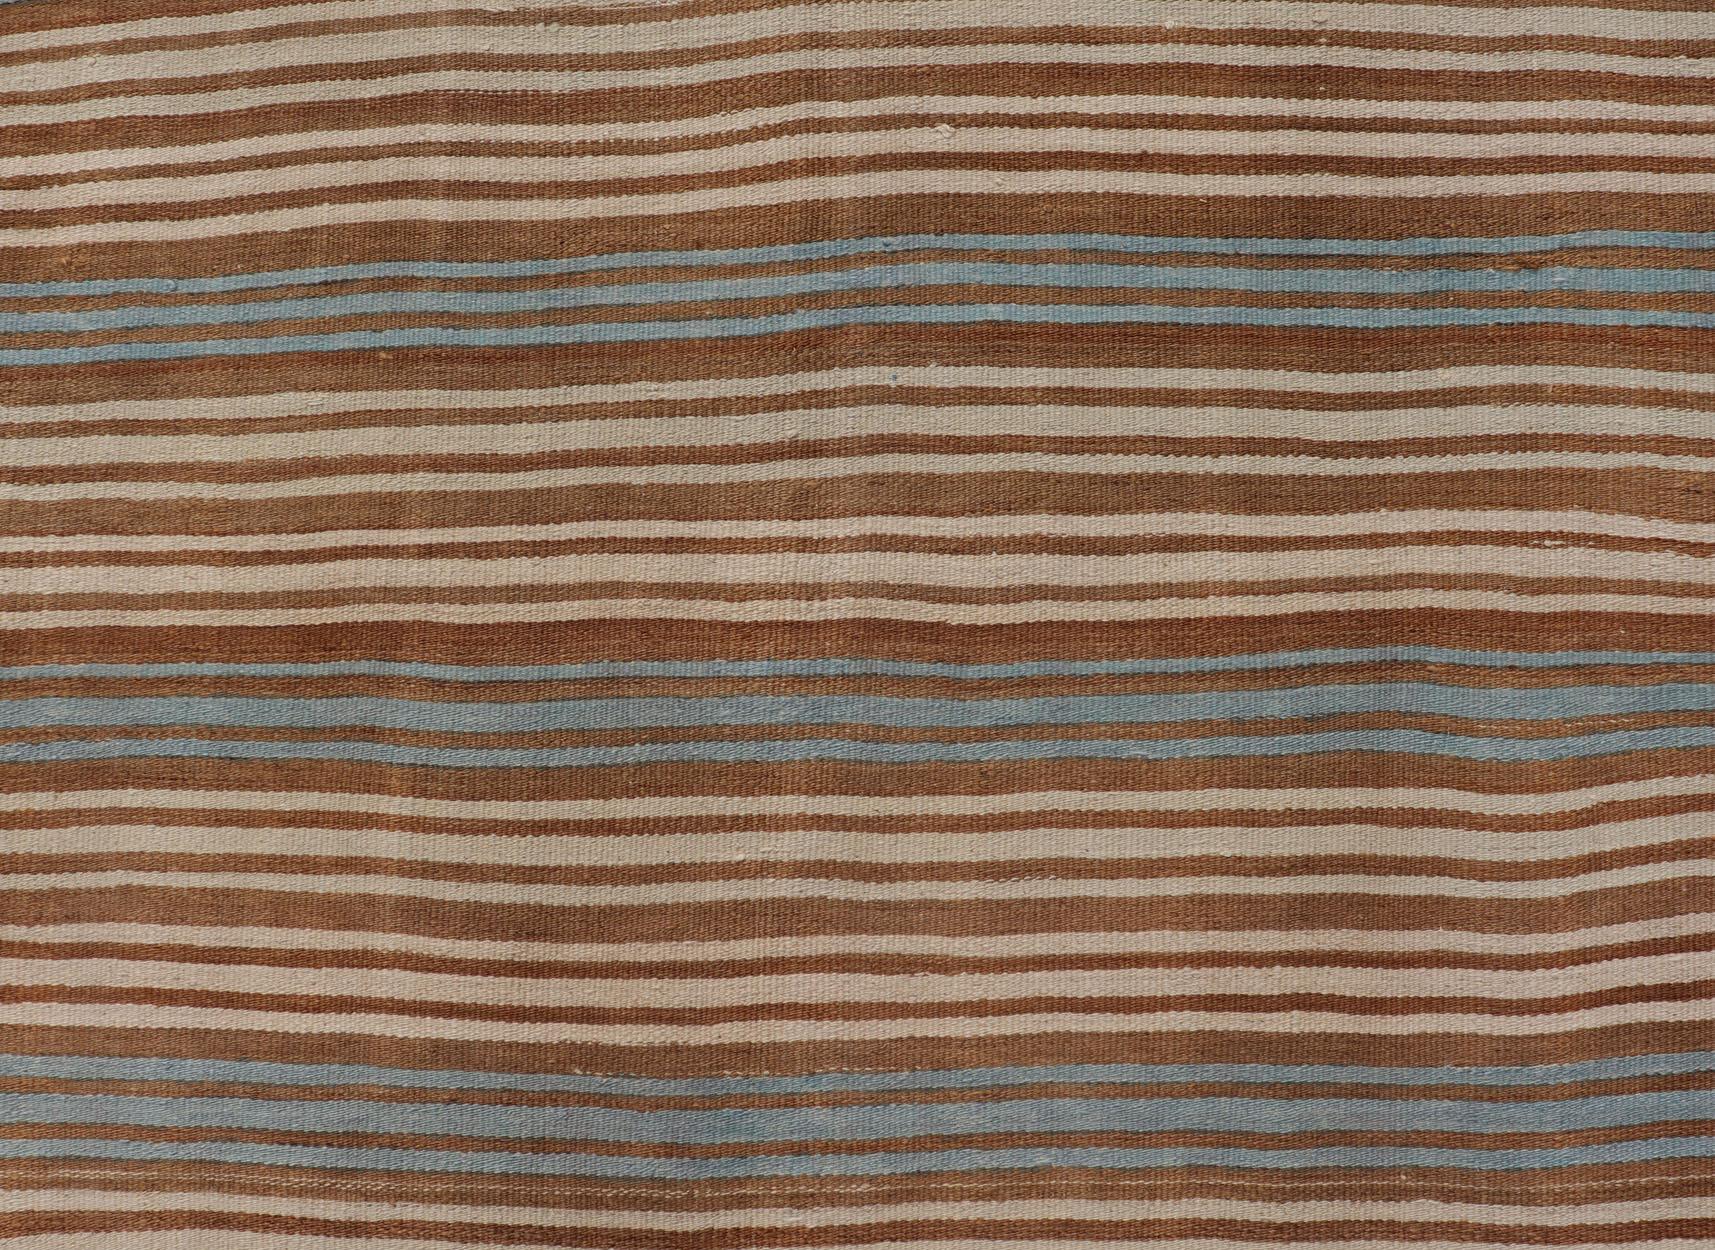 Vintage Hand Woven Turkish Kilim with Stripes in Brown, Cream and Light Blue In Good Condition For Sale In Atlanta, GA